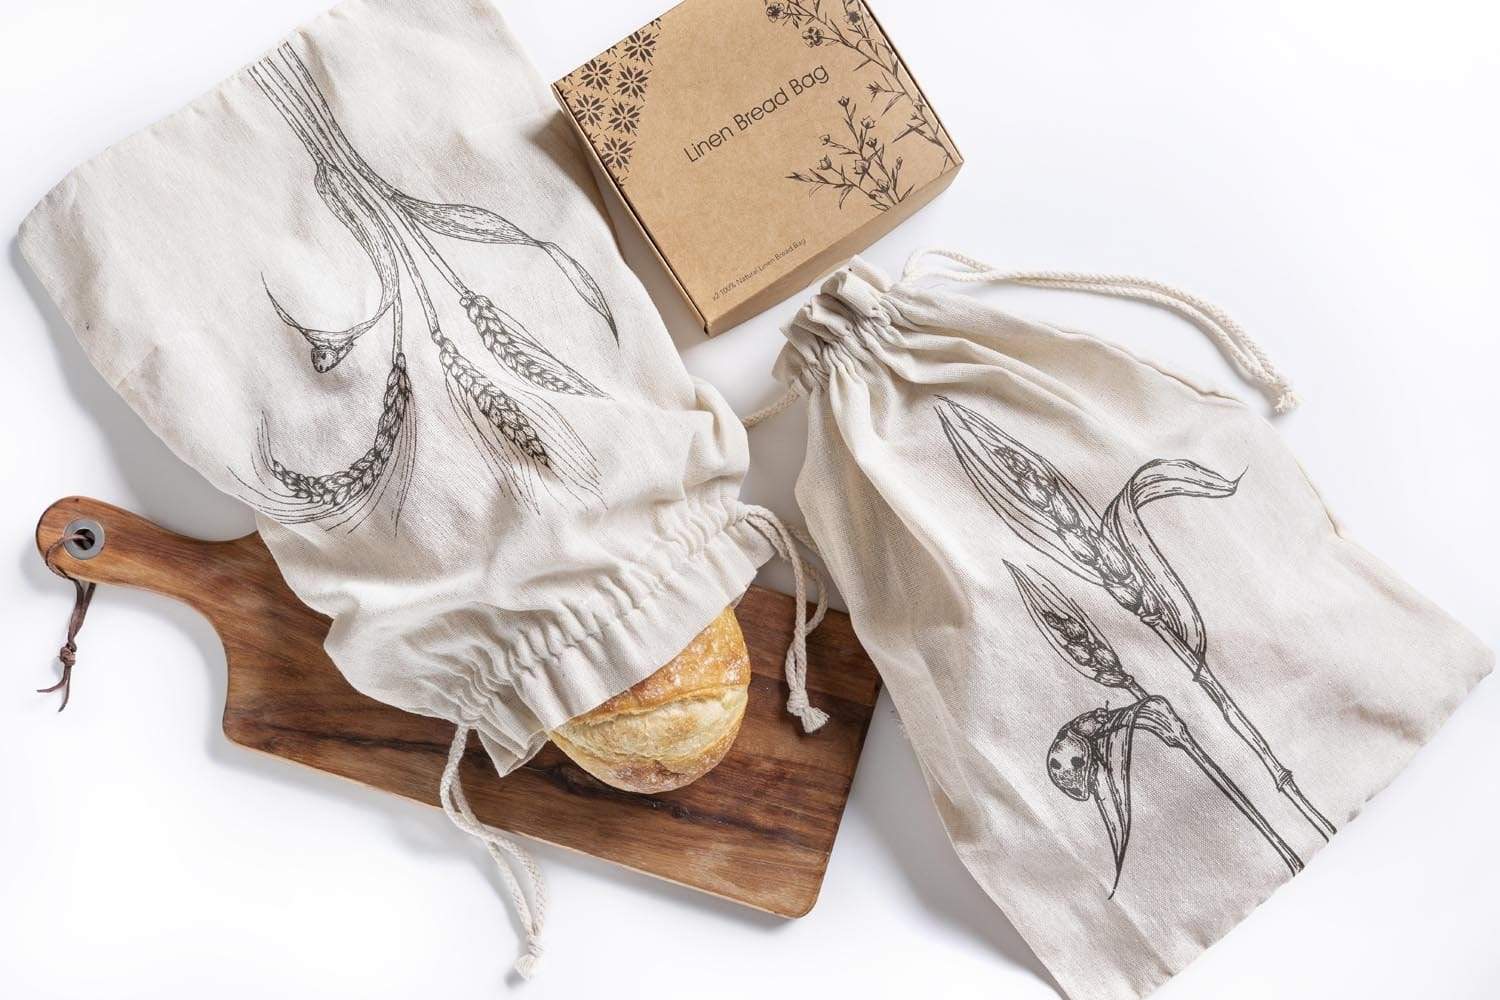 2 bread bags with craft paper gift box